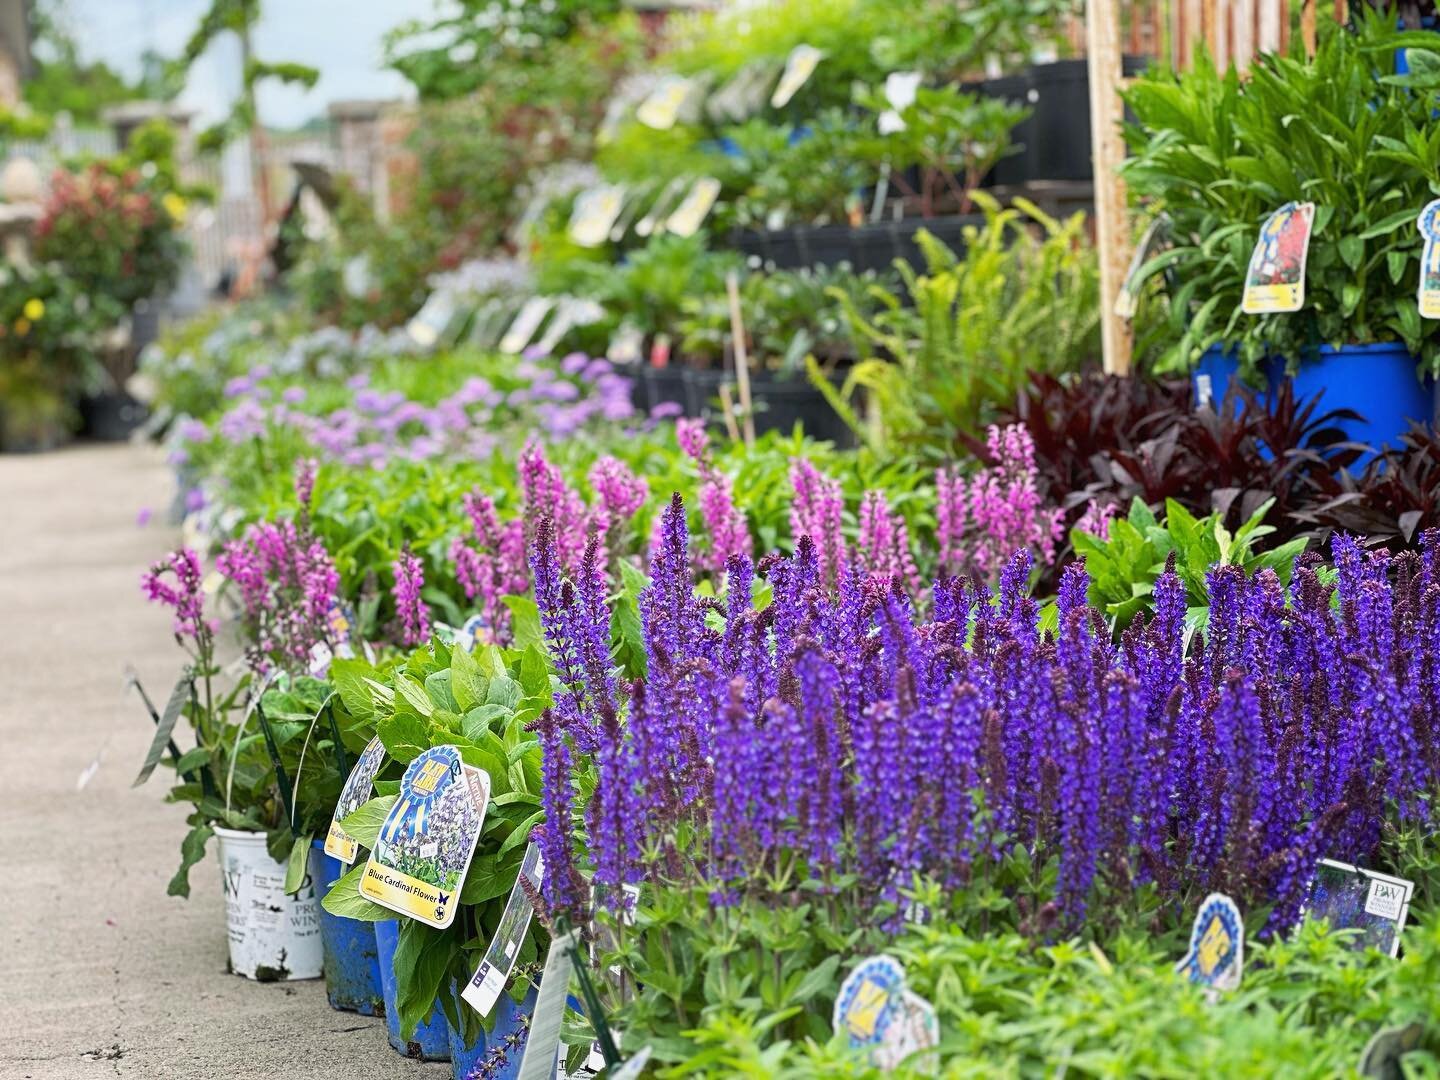 We are swimming in seas of flowers &amp; shrubs, many of which arrived just today 🌼🍃 With Mother&rsquo;s Day right around the corner, it&rsquo;s the perfect weekend to visit your local garden center 💕 #gardencenter #landscape #landscapedesign #blo